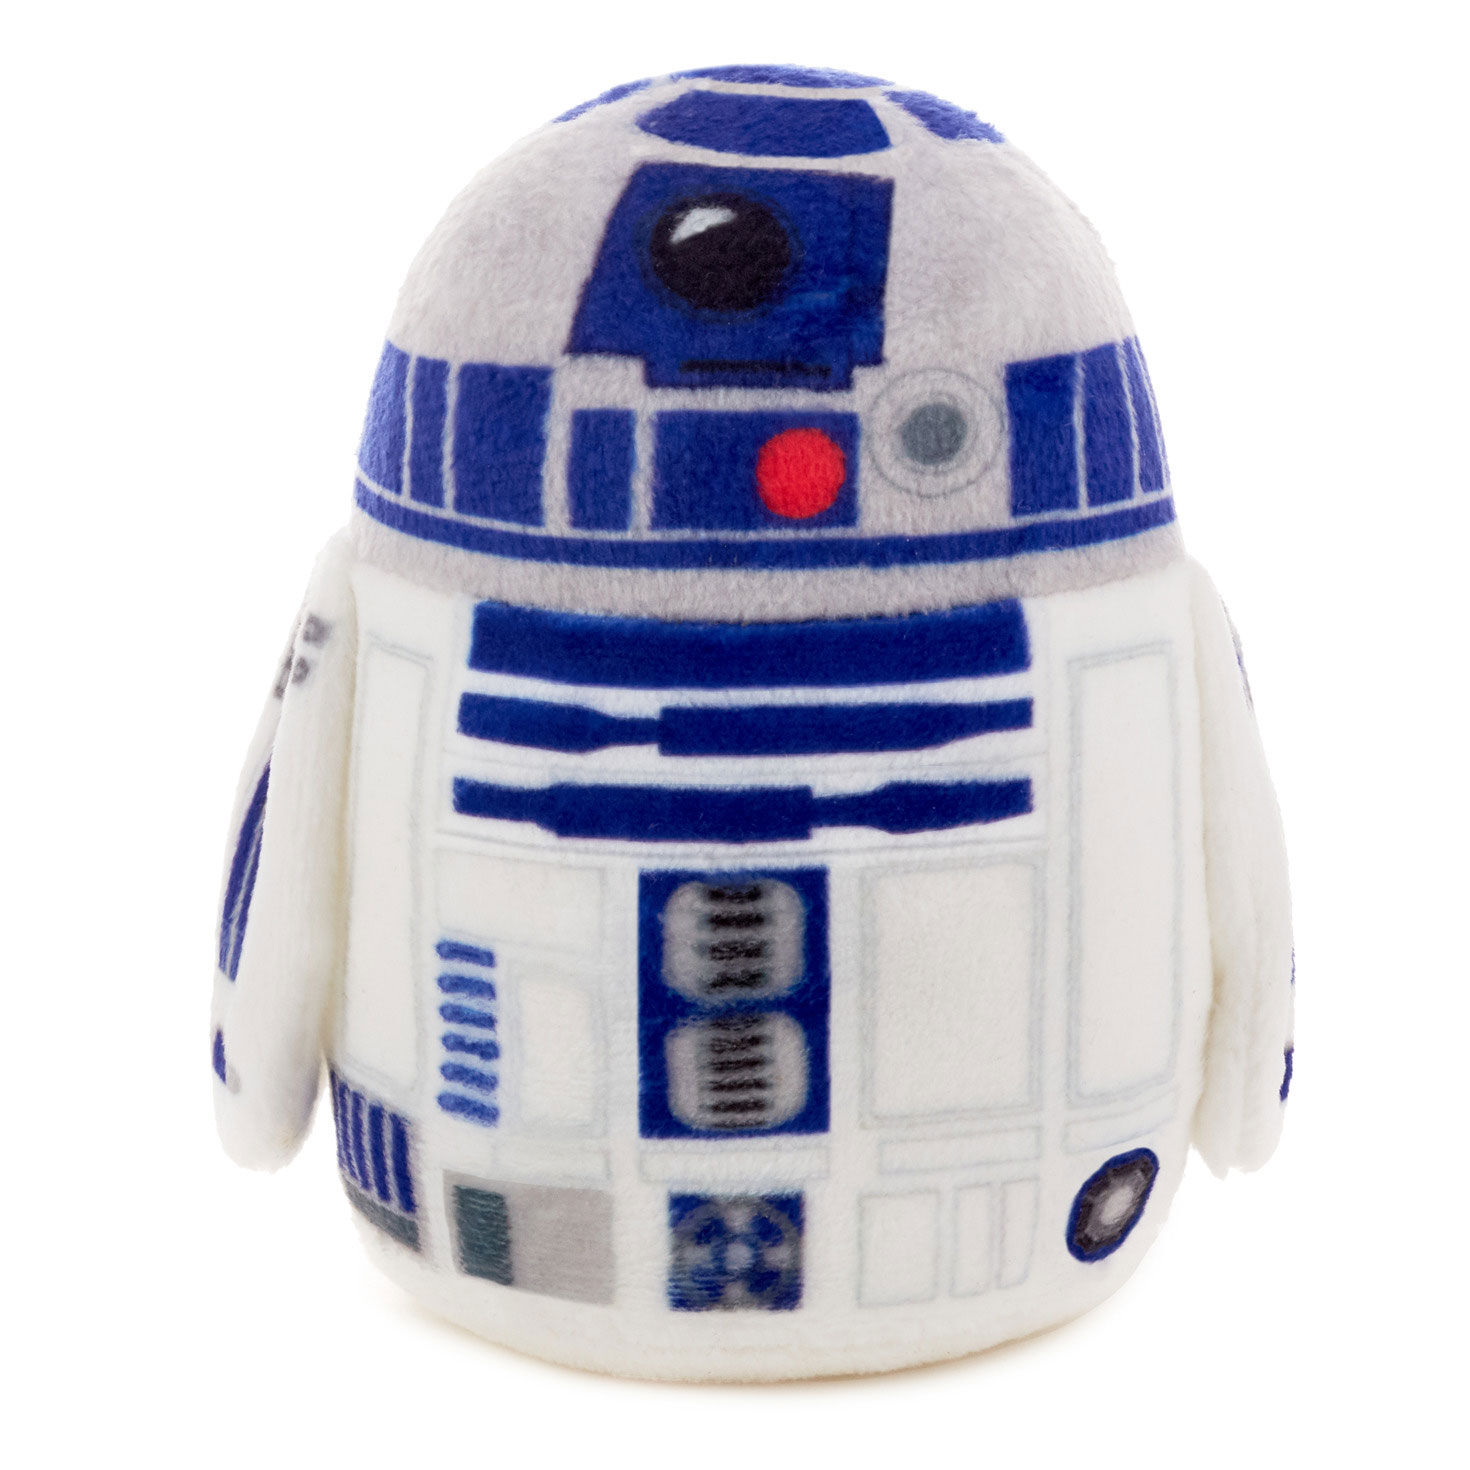 itty bittys® Star Wars™ R2-D2™ Plush With Sound for only USD 14.99 | Hallmark